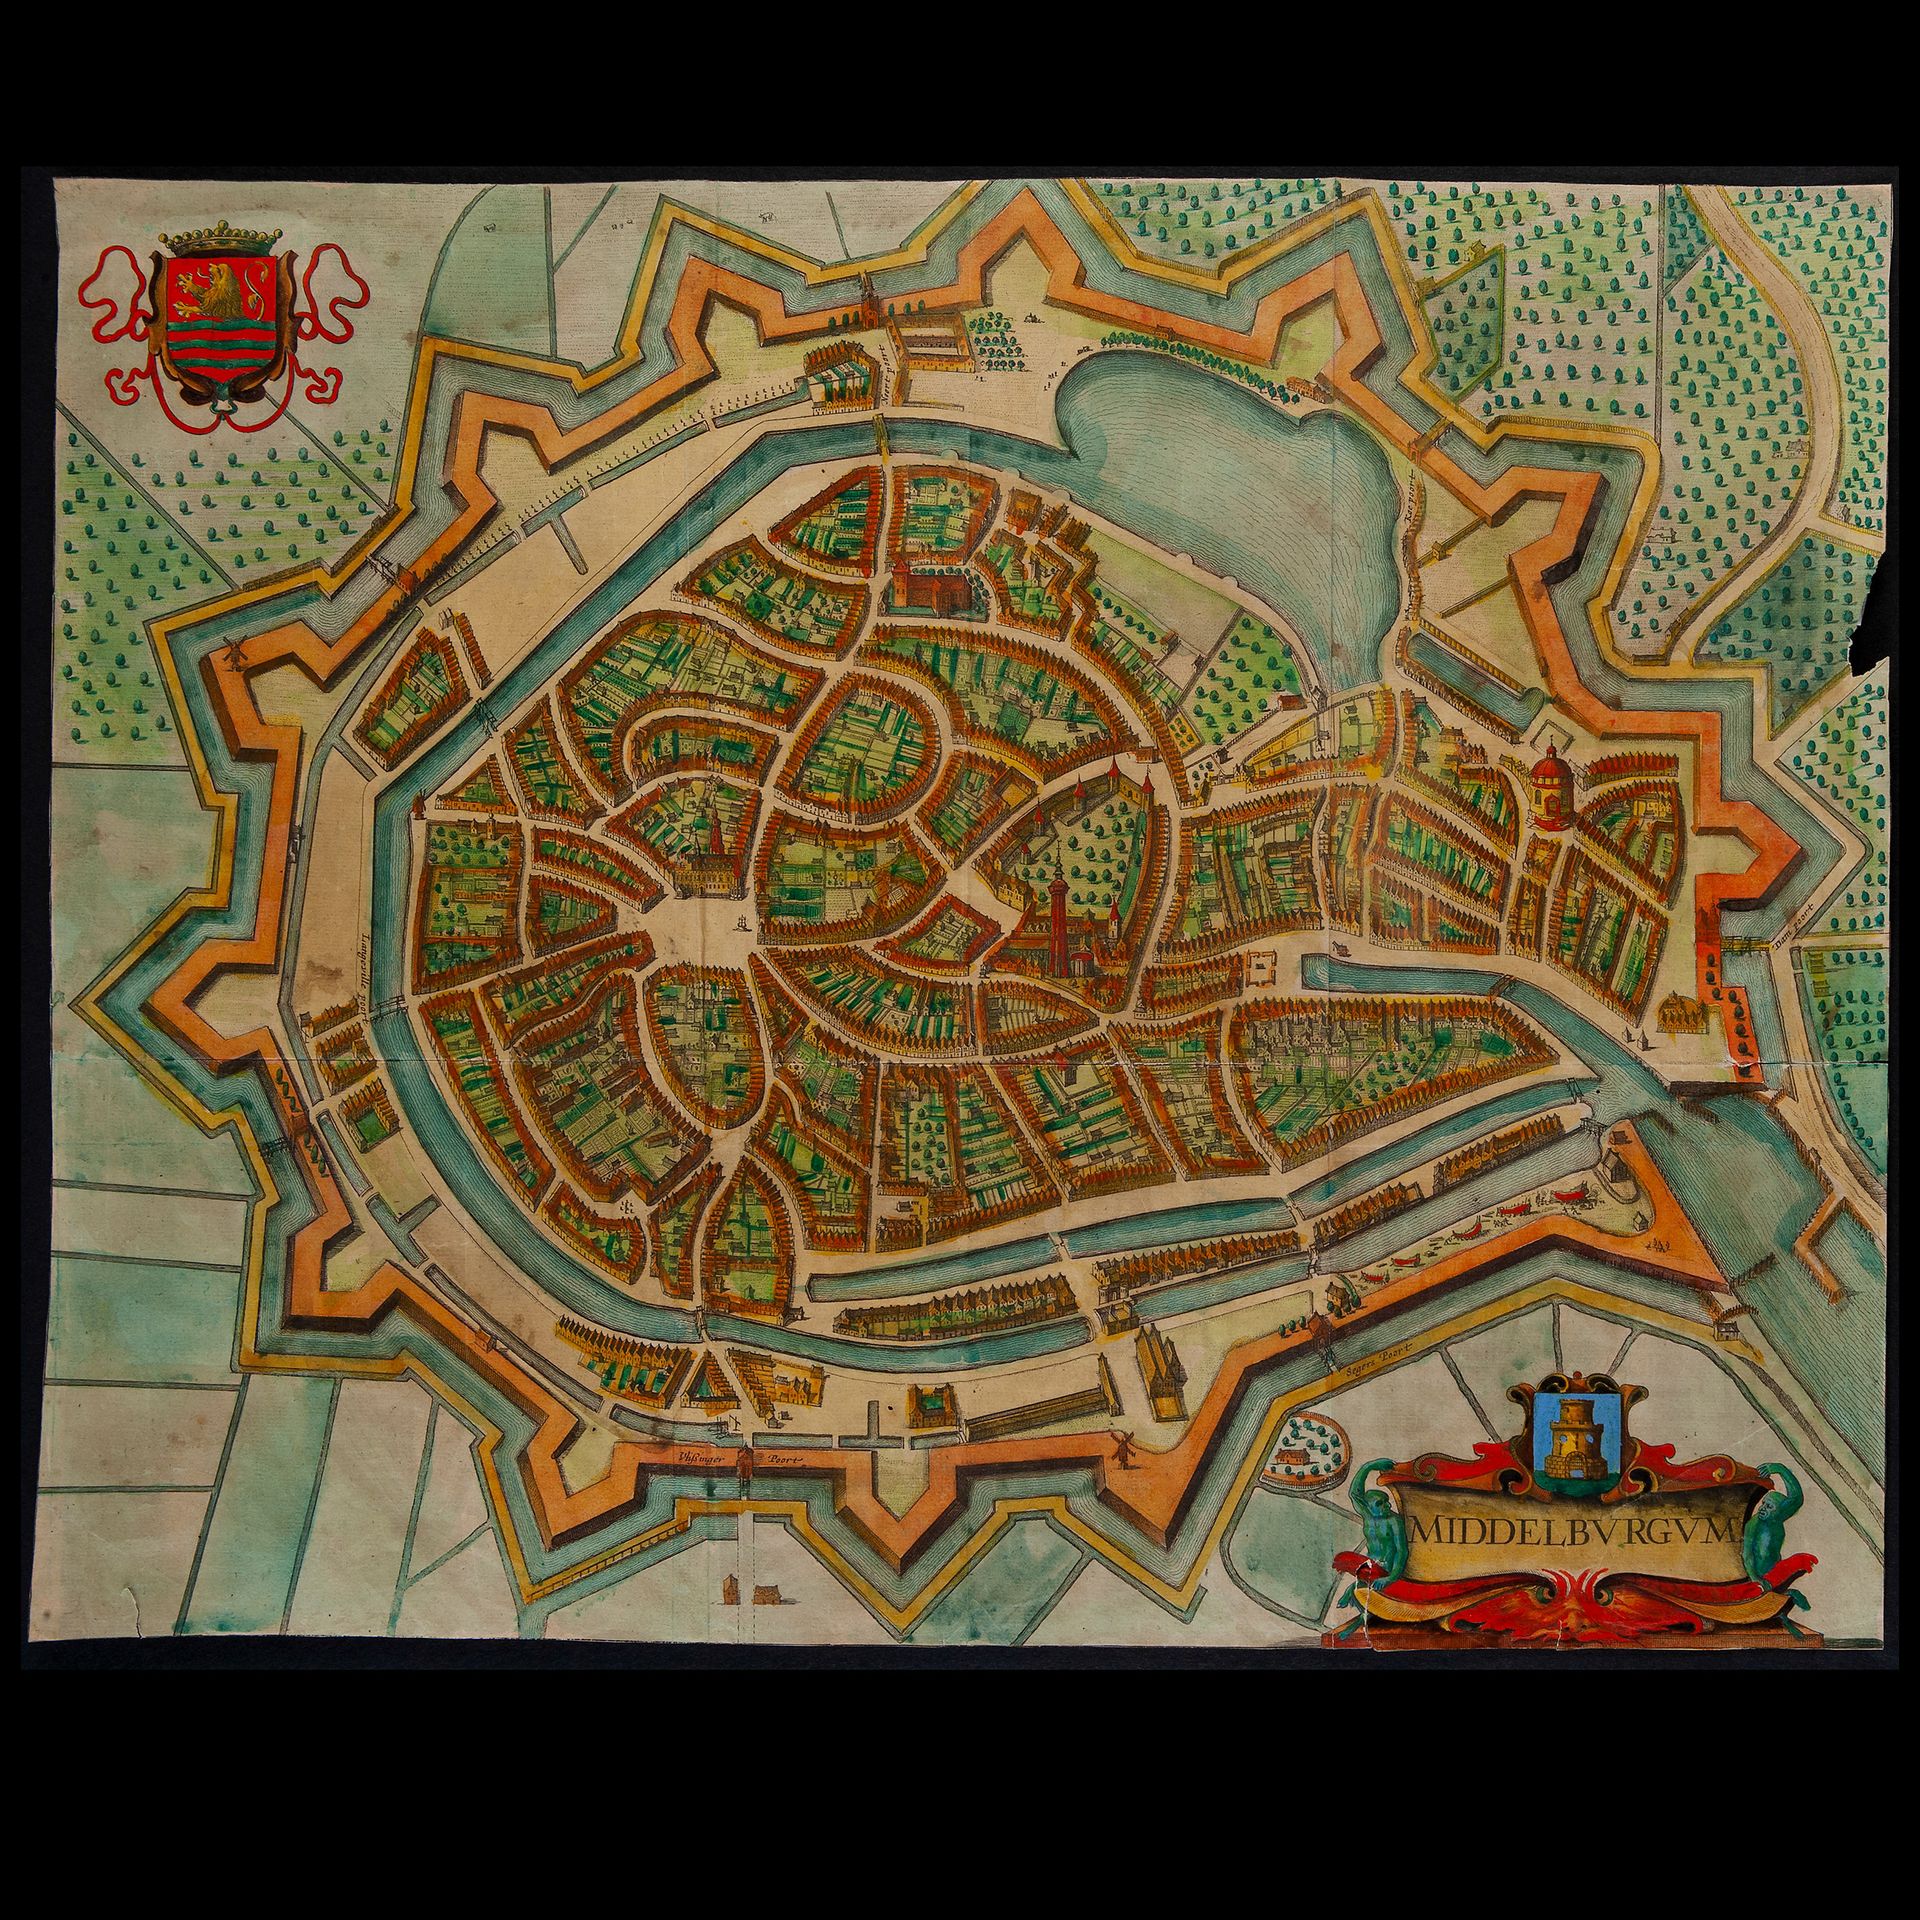 Painted map of the town of Middelburgum, second half of the 17th century Gravure&hellip;